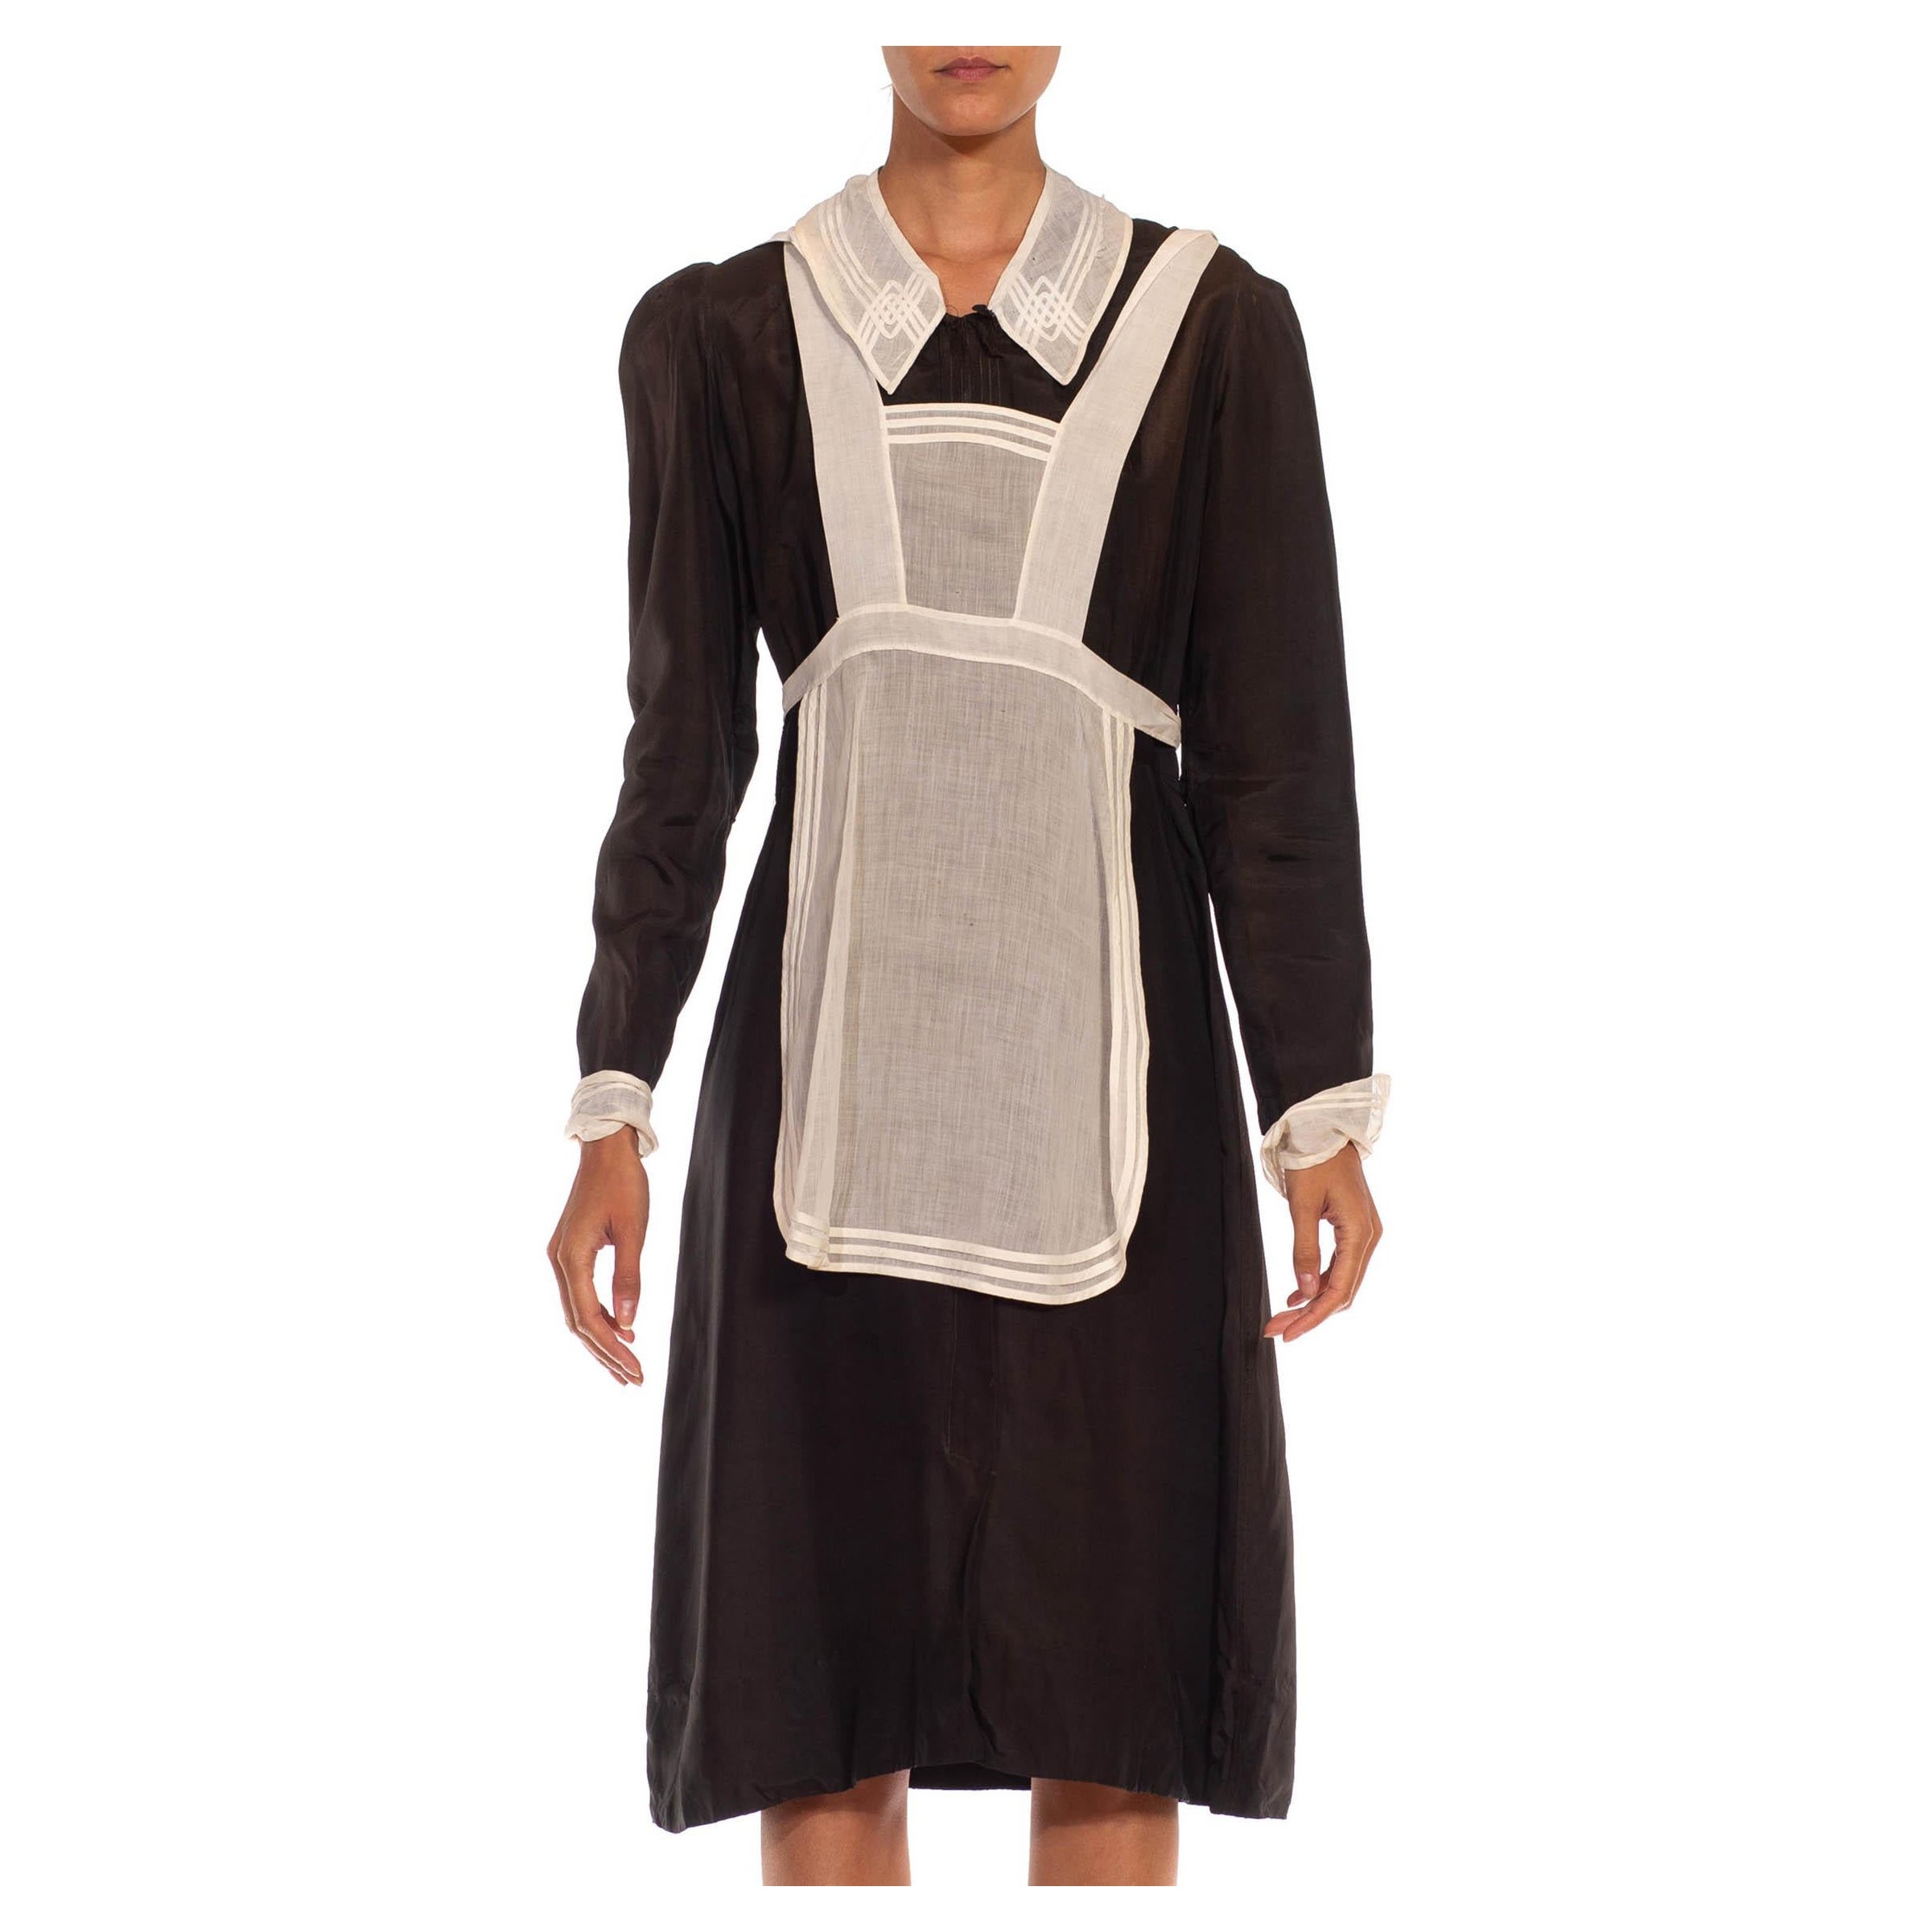 1930S Black & White Acetate French Maid Dress With Art Deco Trim